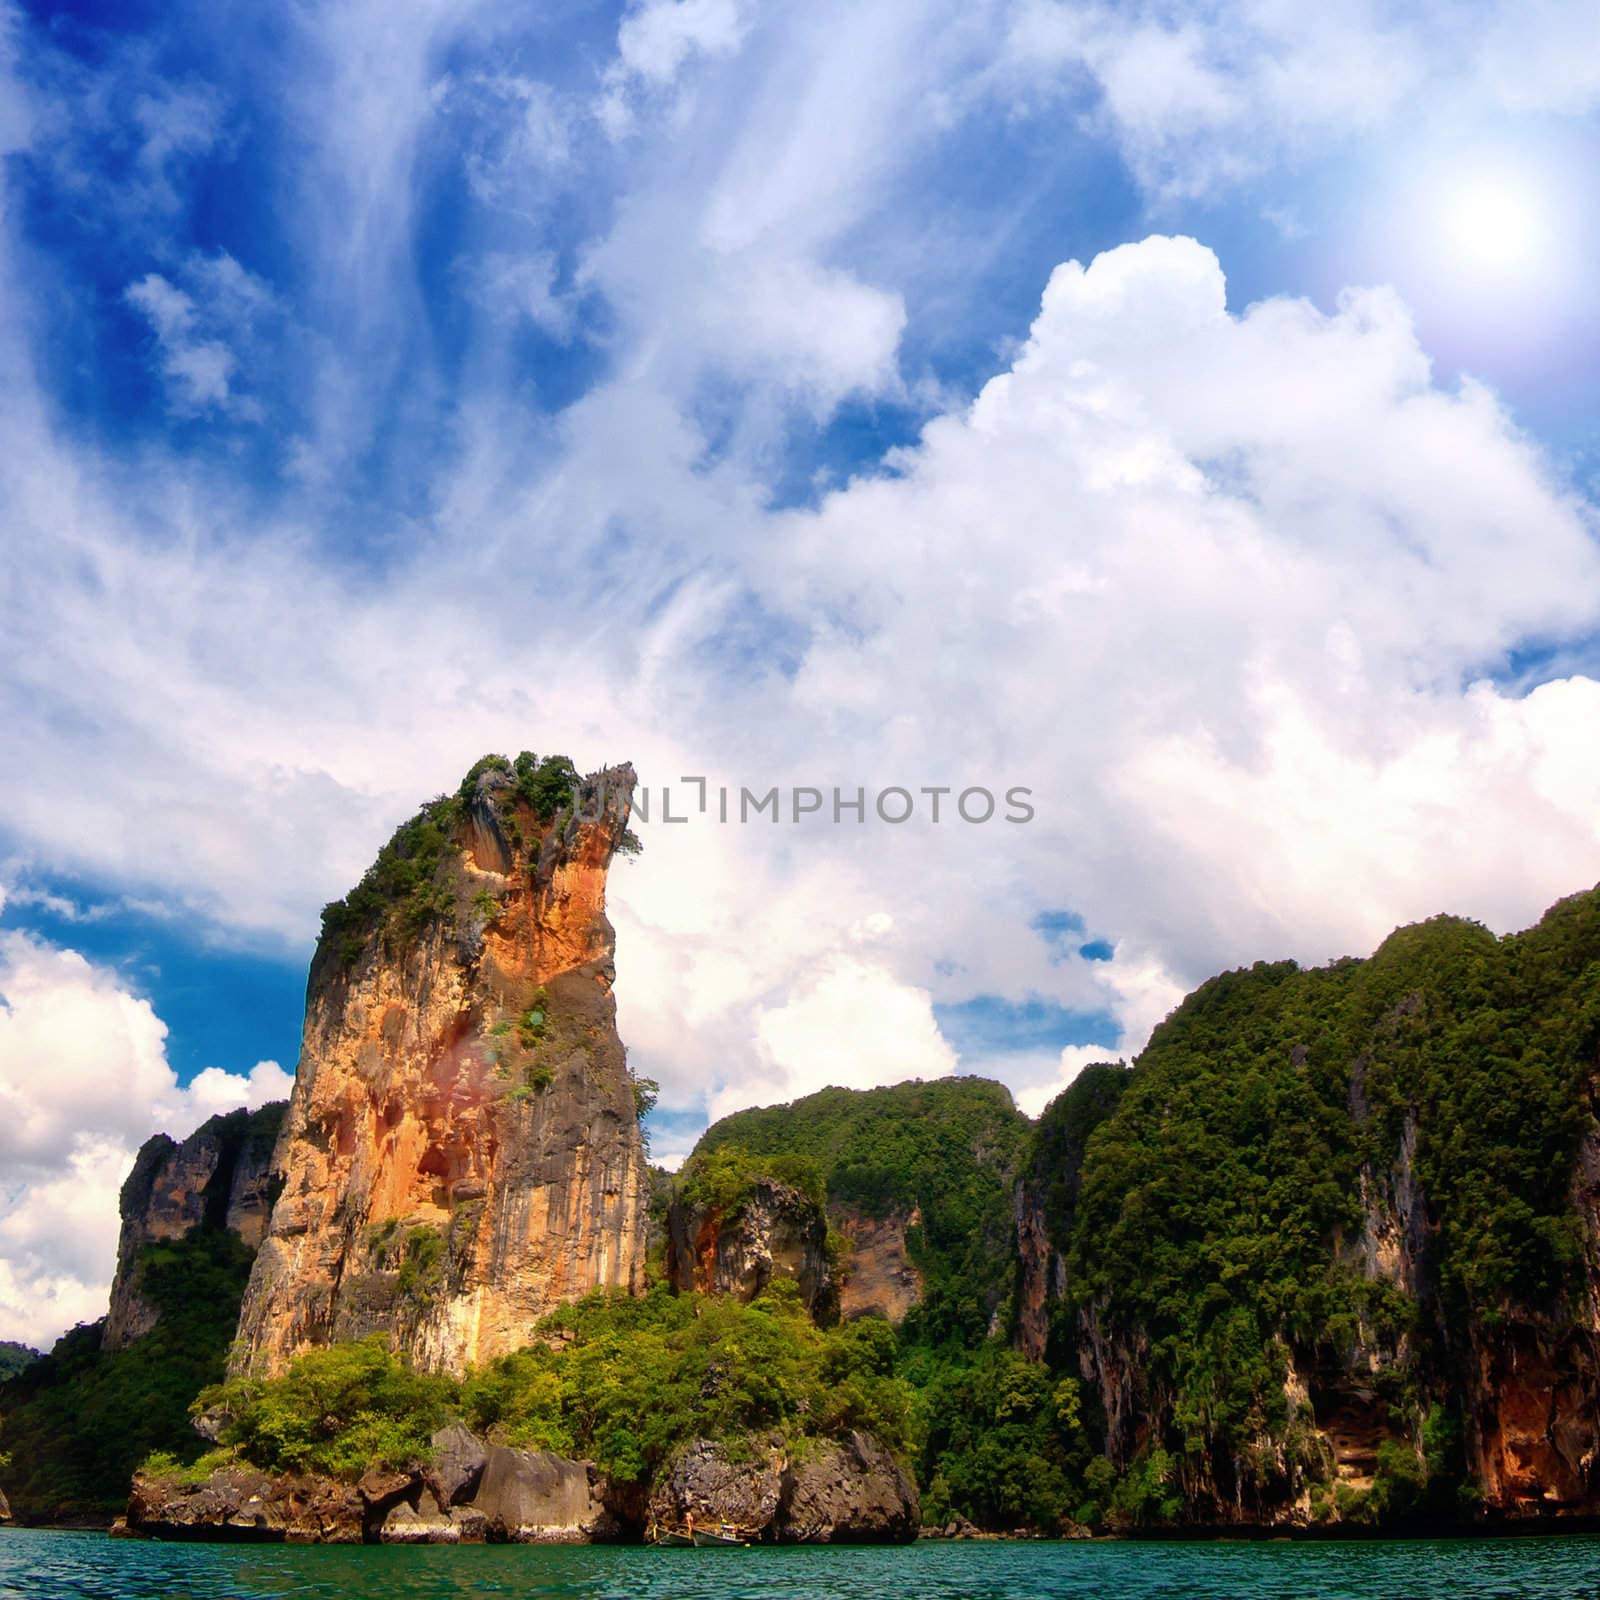 Sea, sky and cliffs in Krabi province, Thailand 